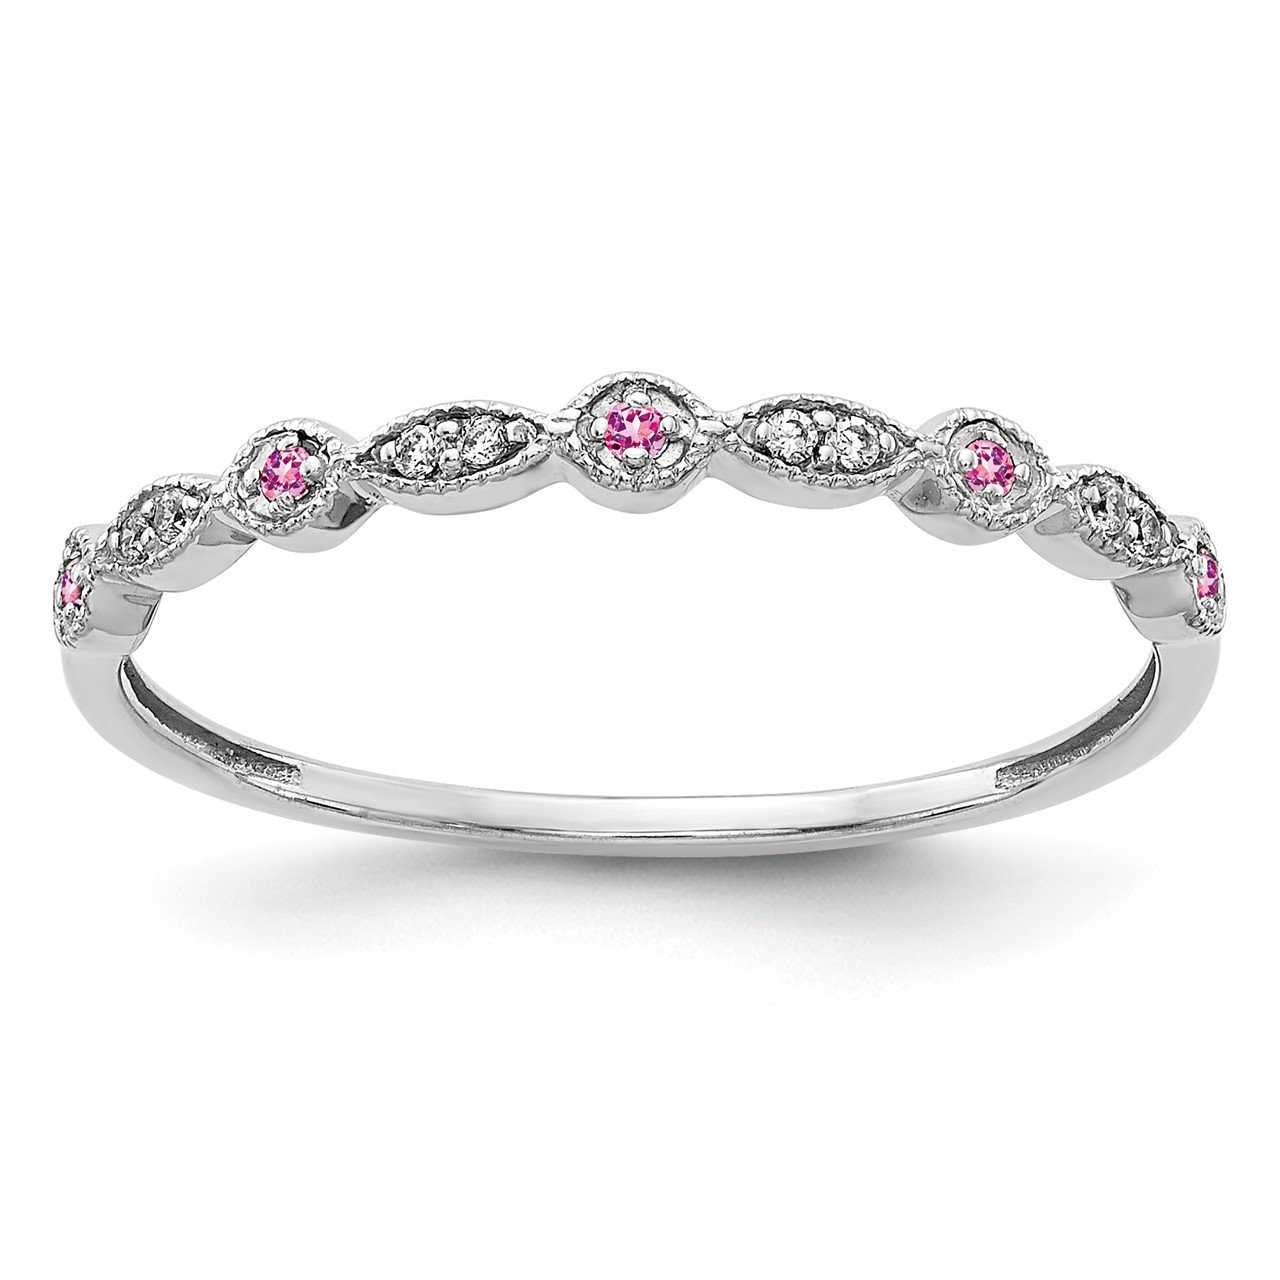 14k White Gold Diamond and Pink Sapphire Fancy Band